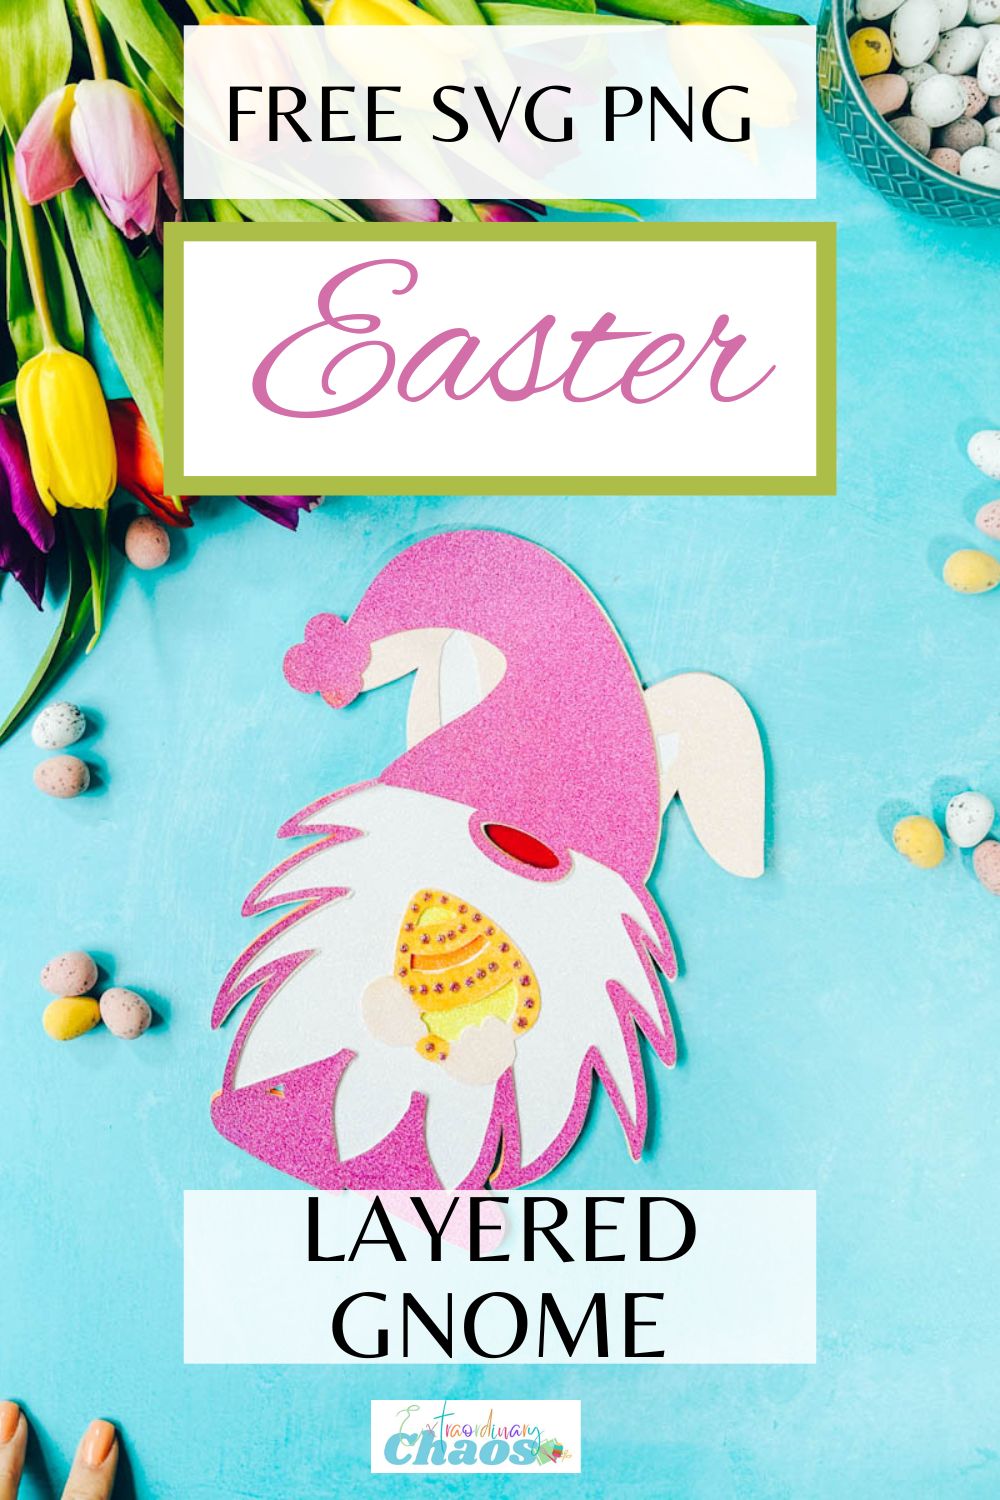 Free SVG PNG layered Easter Bunny Gnome for Easter crafts with Cricut, Silhouette, xTool and Glowforge